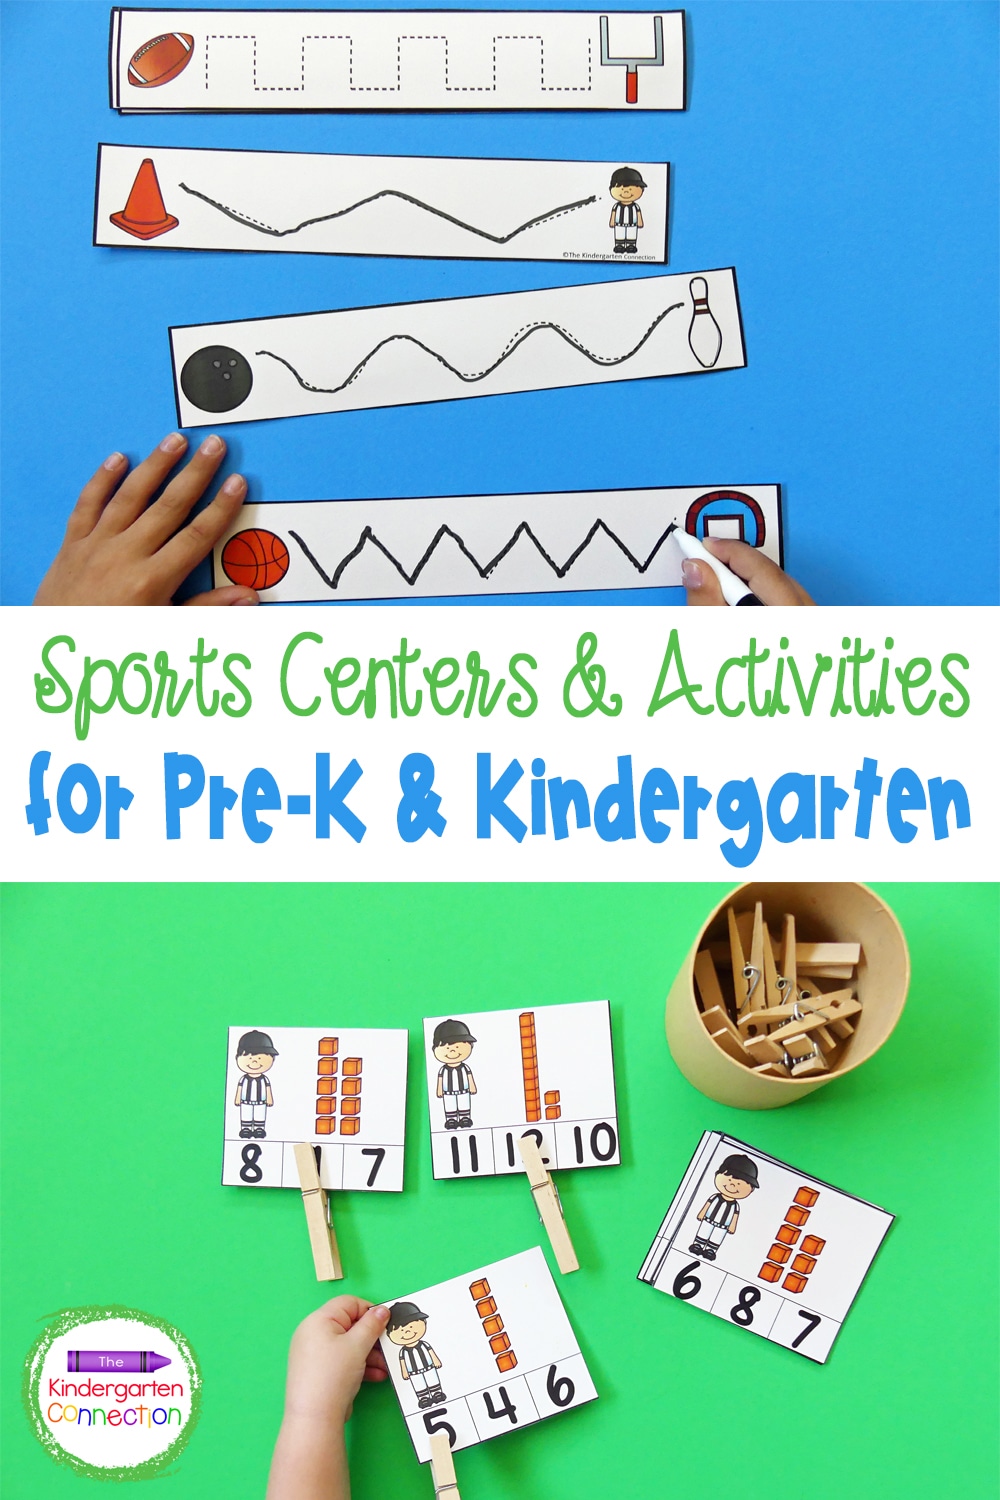 Add some extra spirit and learning fun into your centers today with these engaging Sports Themed Activities for Pre-K & Kindergarten!